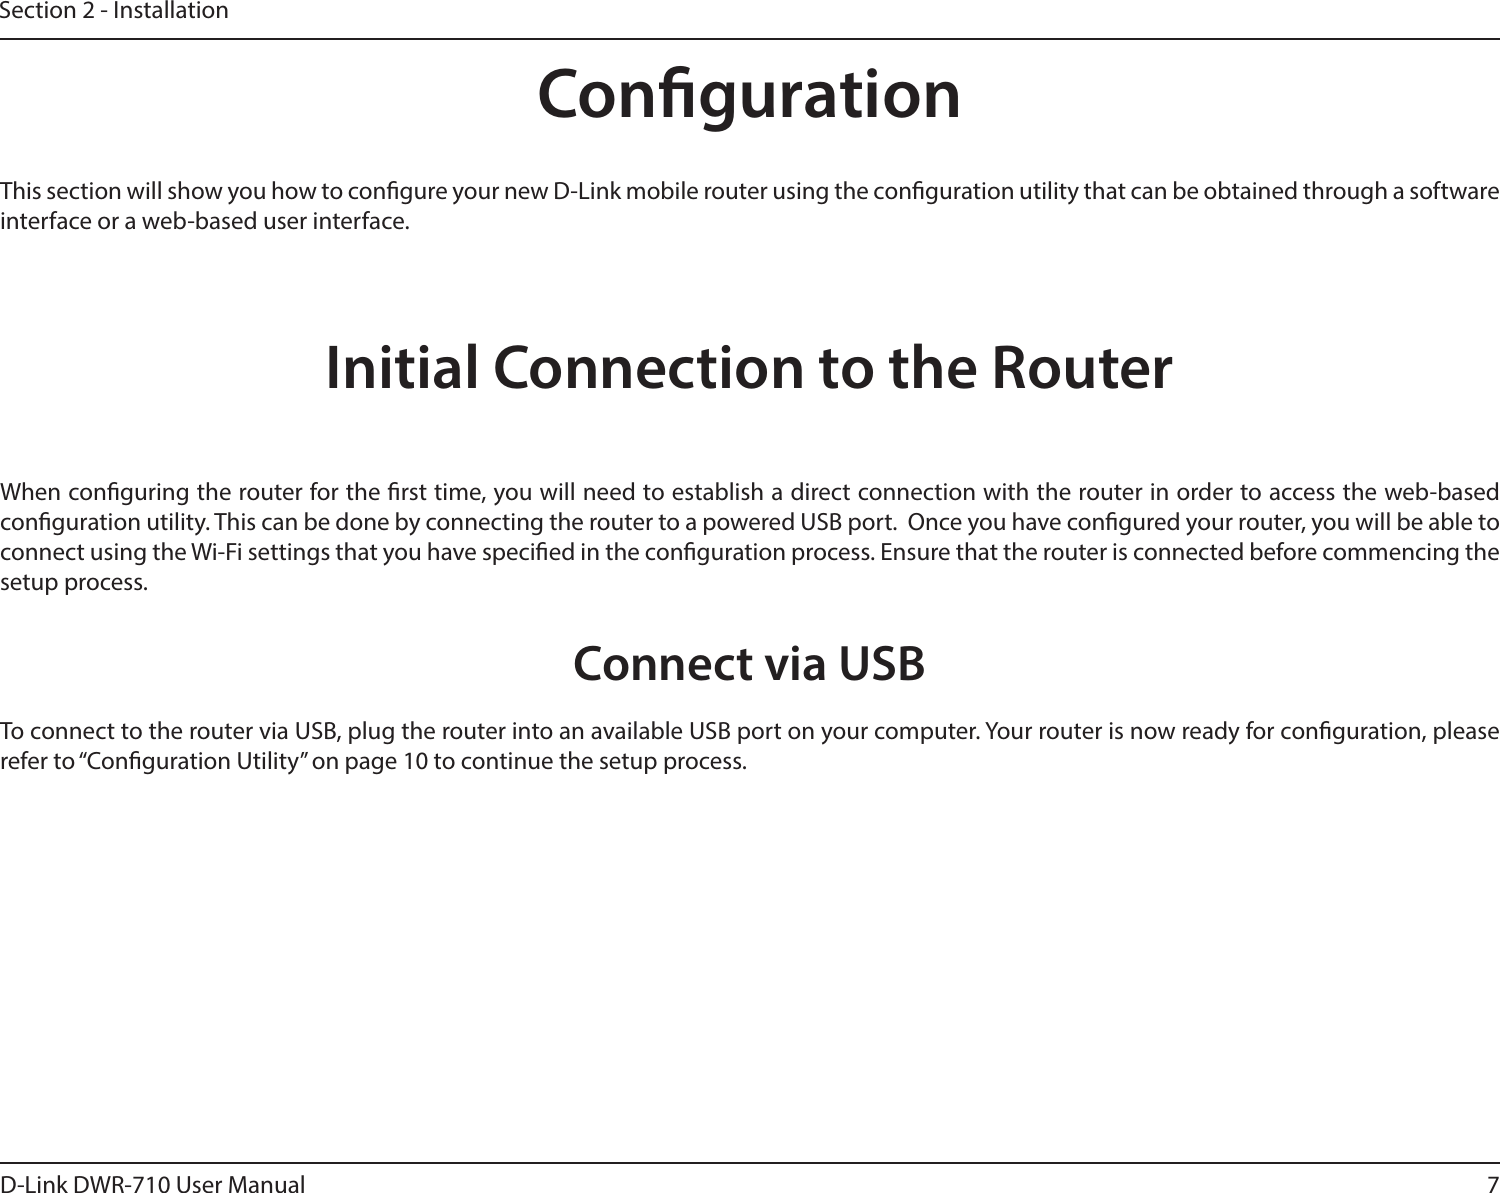 7D-Link DWR-710 User ManualSection 2 - InstallationCongurationInitial Connection to the RouterThis section will show you how to congure your new D-Link mobile router using the conguration utility that can be obtained through a software interface or a web-based user interface.When conguring the router for the rst time, you will need to establish a direct connection with the router in order to access the web-based conguration utility. This can be done by connecting the router to a powered USB port.  Once you have congured your router, you will be able to connect using the Wi-Fi settings that you have specied in the conguration process. Ensure that the router is connected before commencing the setup process.Connect via USBTo connect to the router via USB, plug the router into an available USB port on your computer. Your router is now ready for conguration, please refer to “Conguration Utility” on page 10 to continue the setup process.